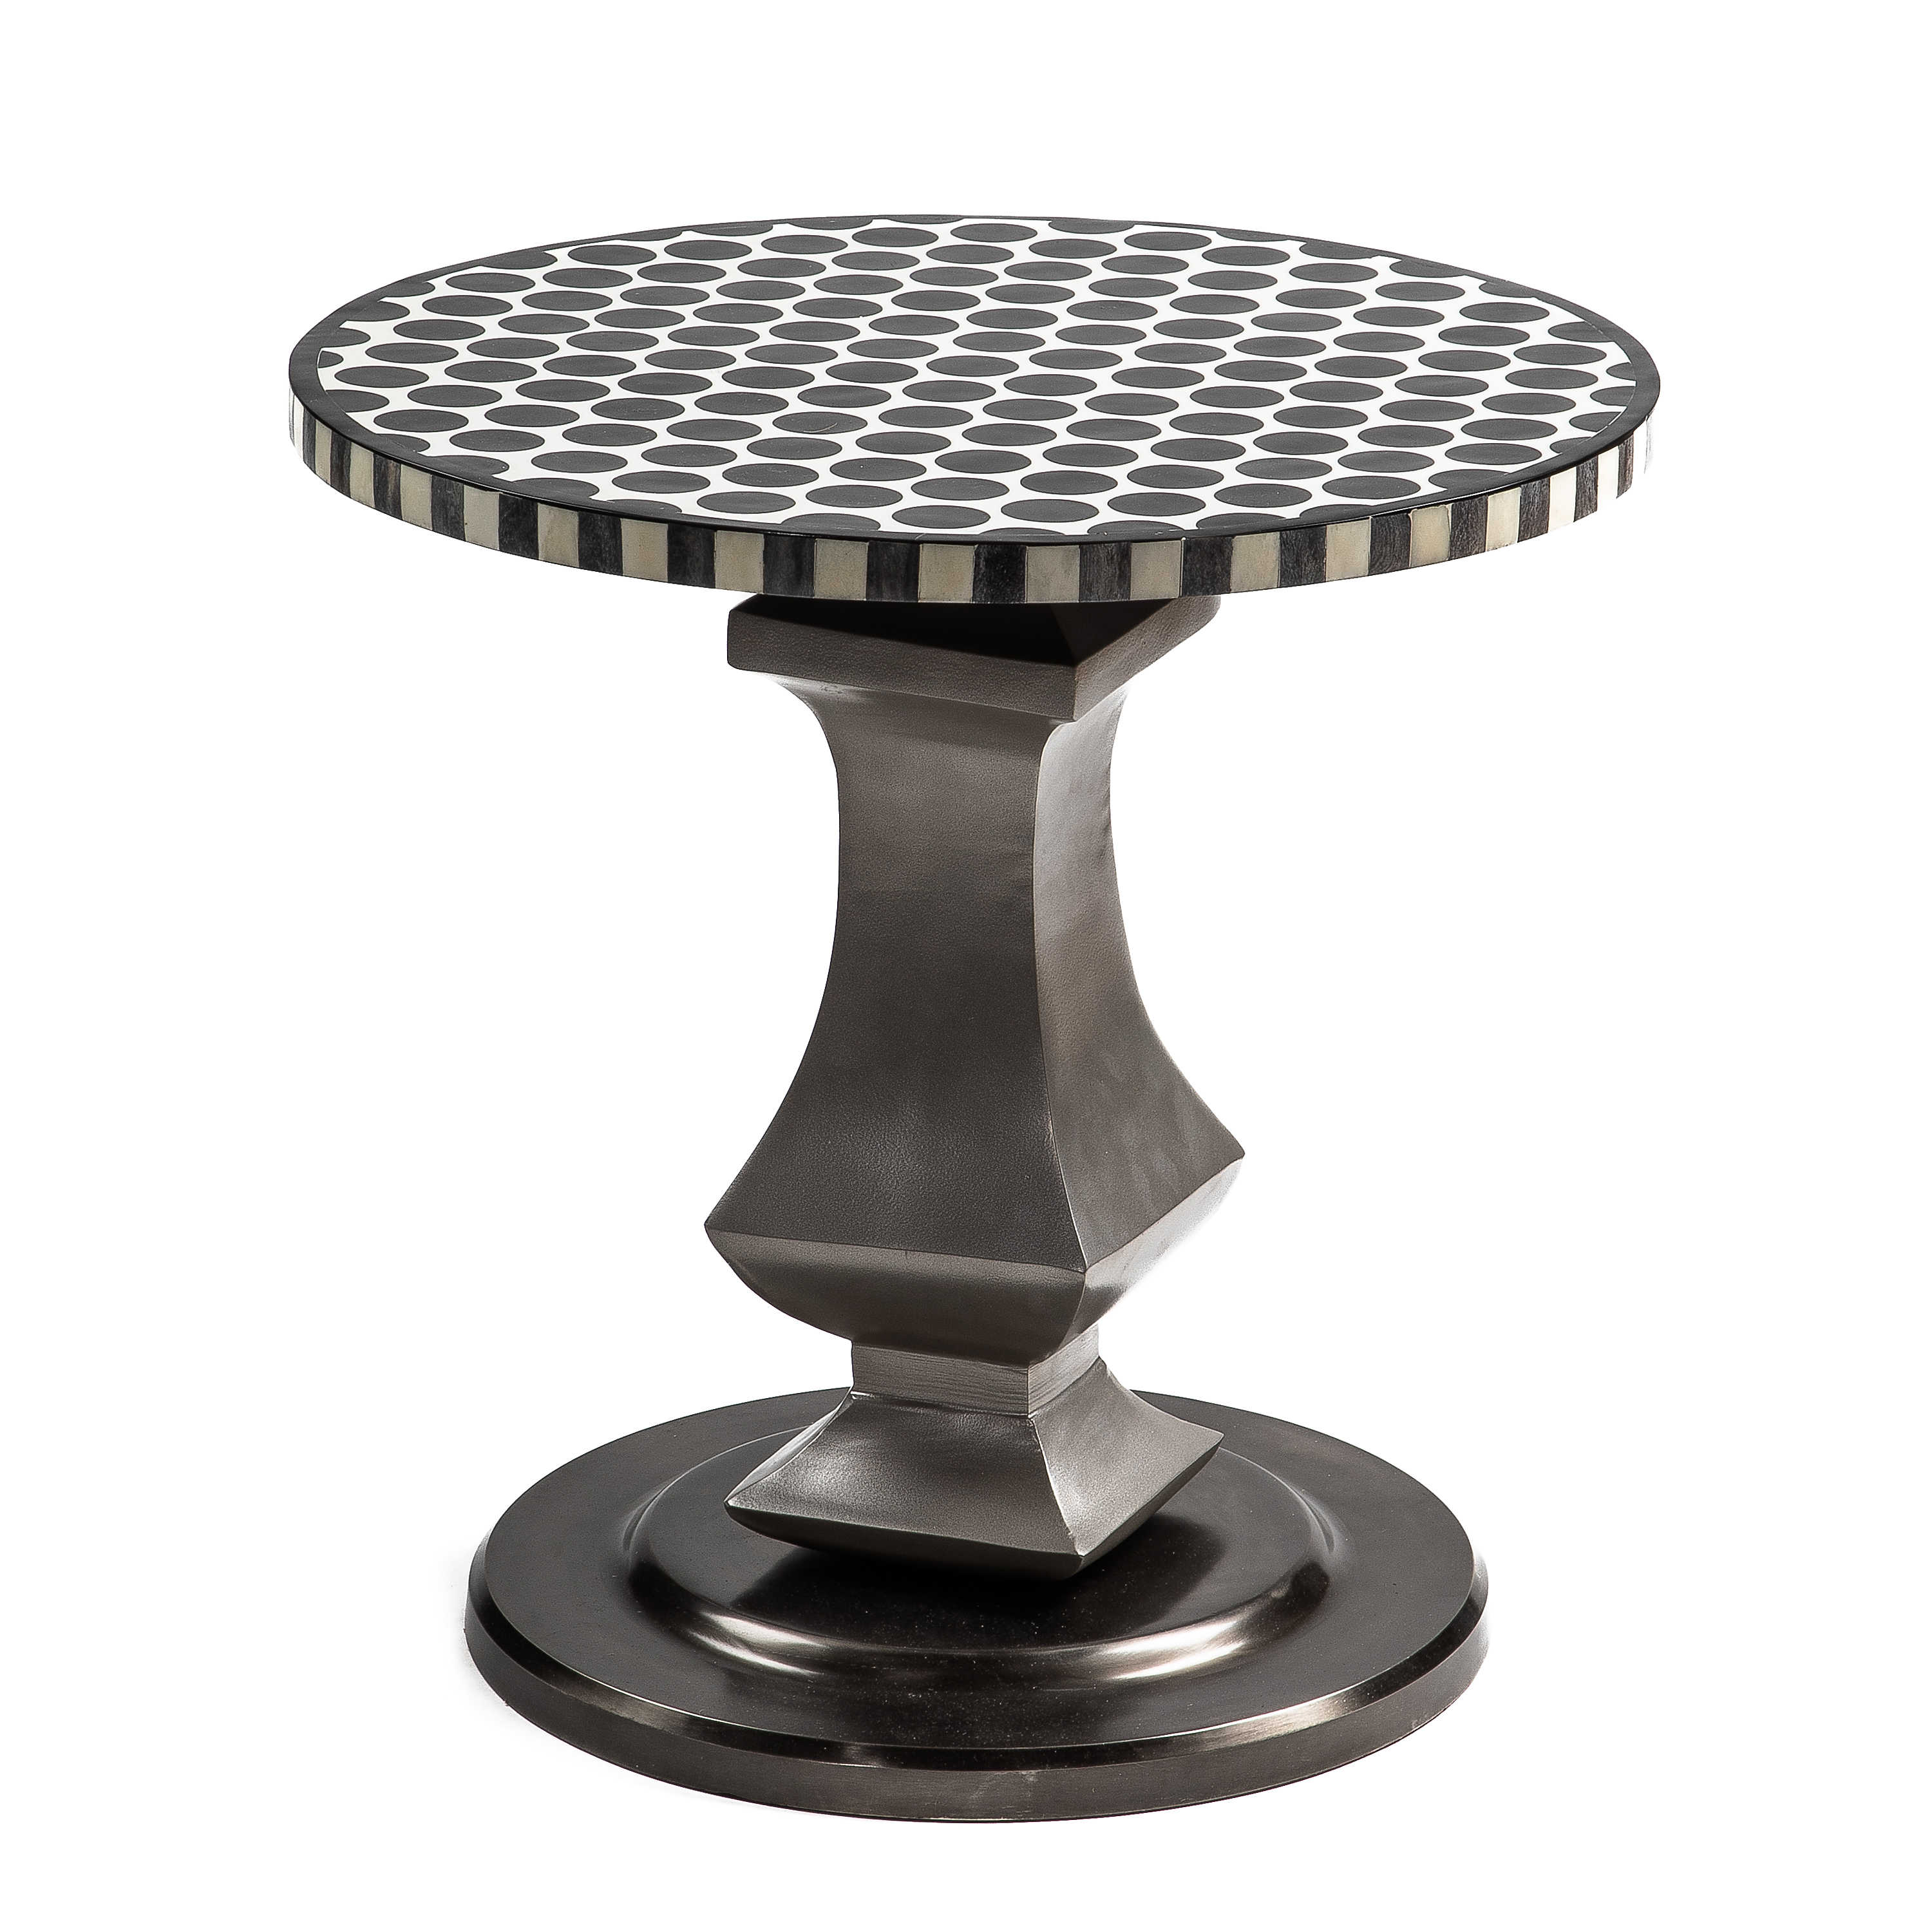 Spot On Accent Table - Black mackenzie-childs Panama 0